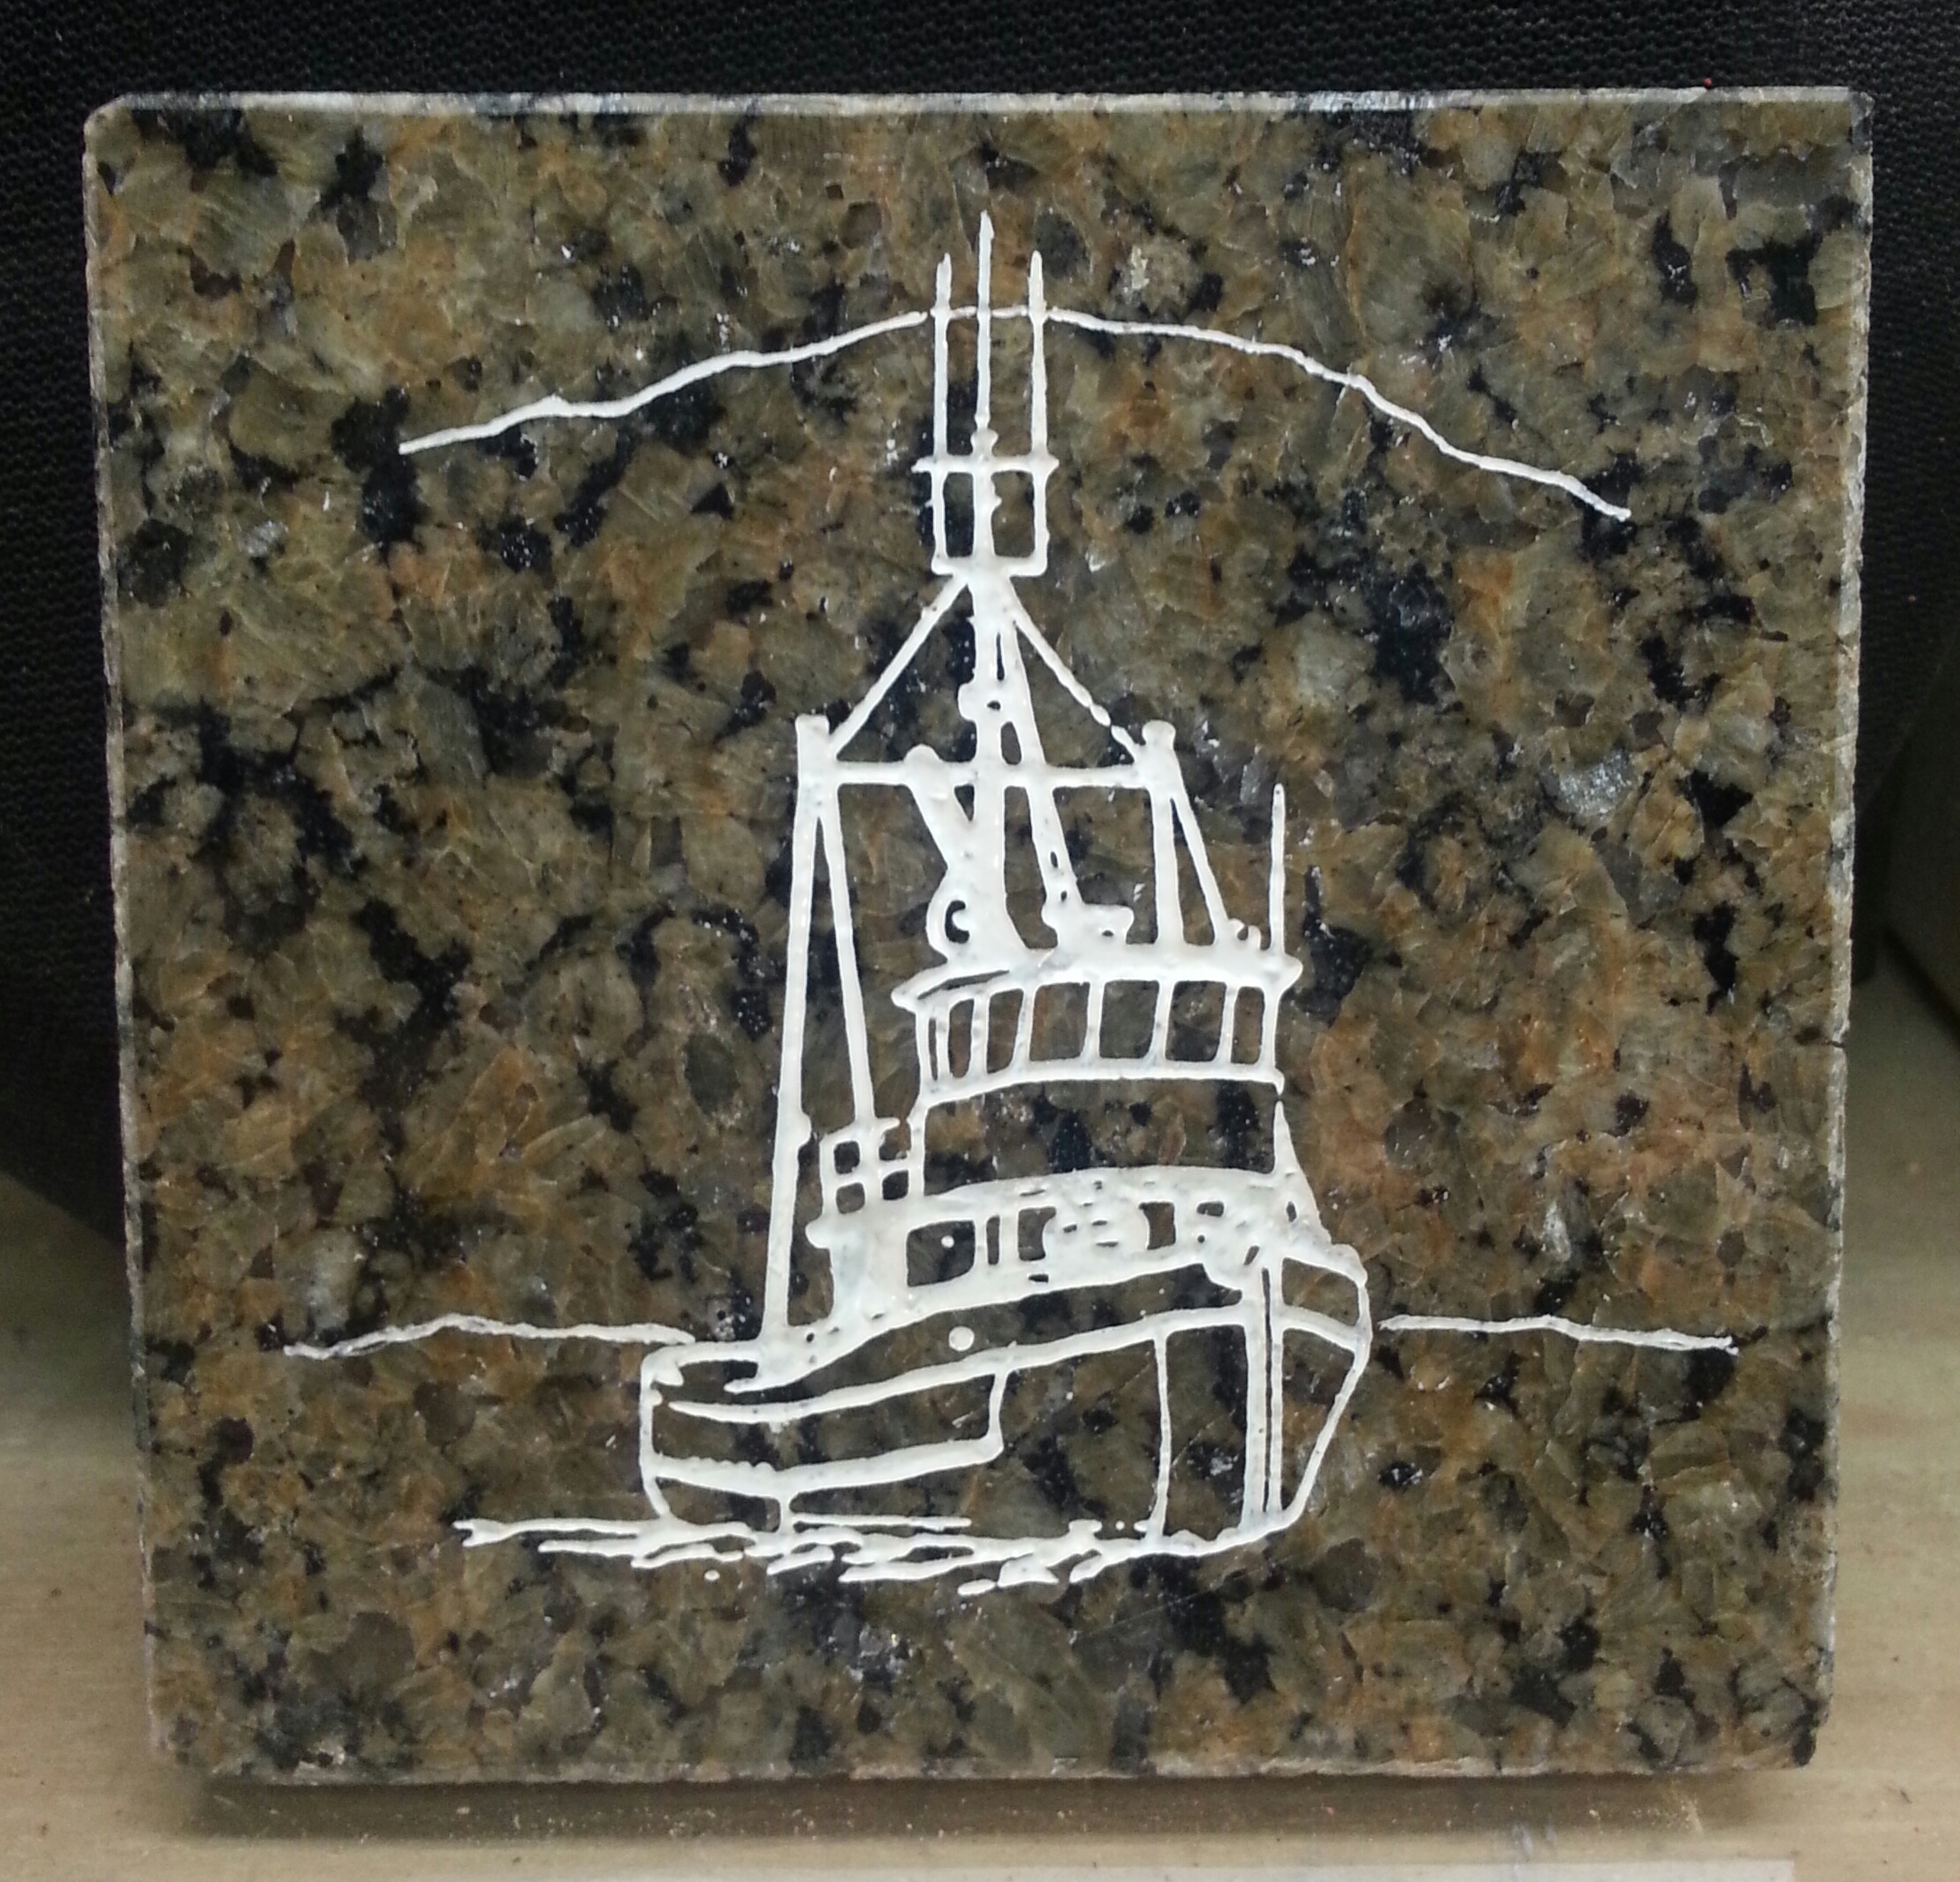 Hand engraved Seine boat on a 4x4 granite coffee coaster... not a cheap laser imitation... $25.00